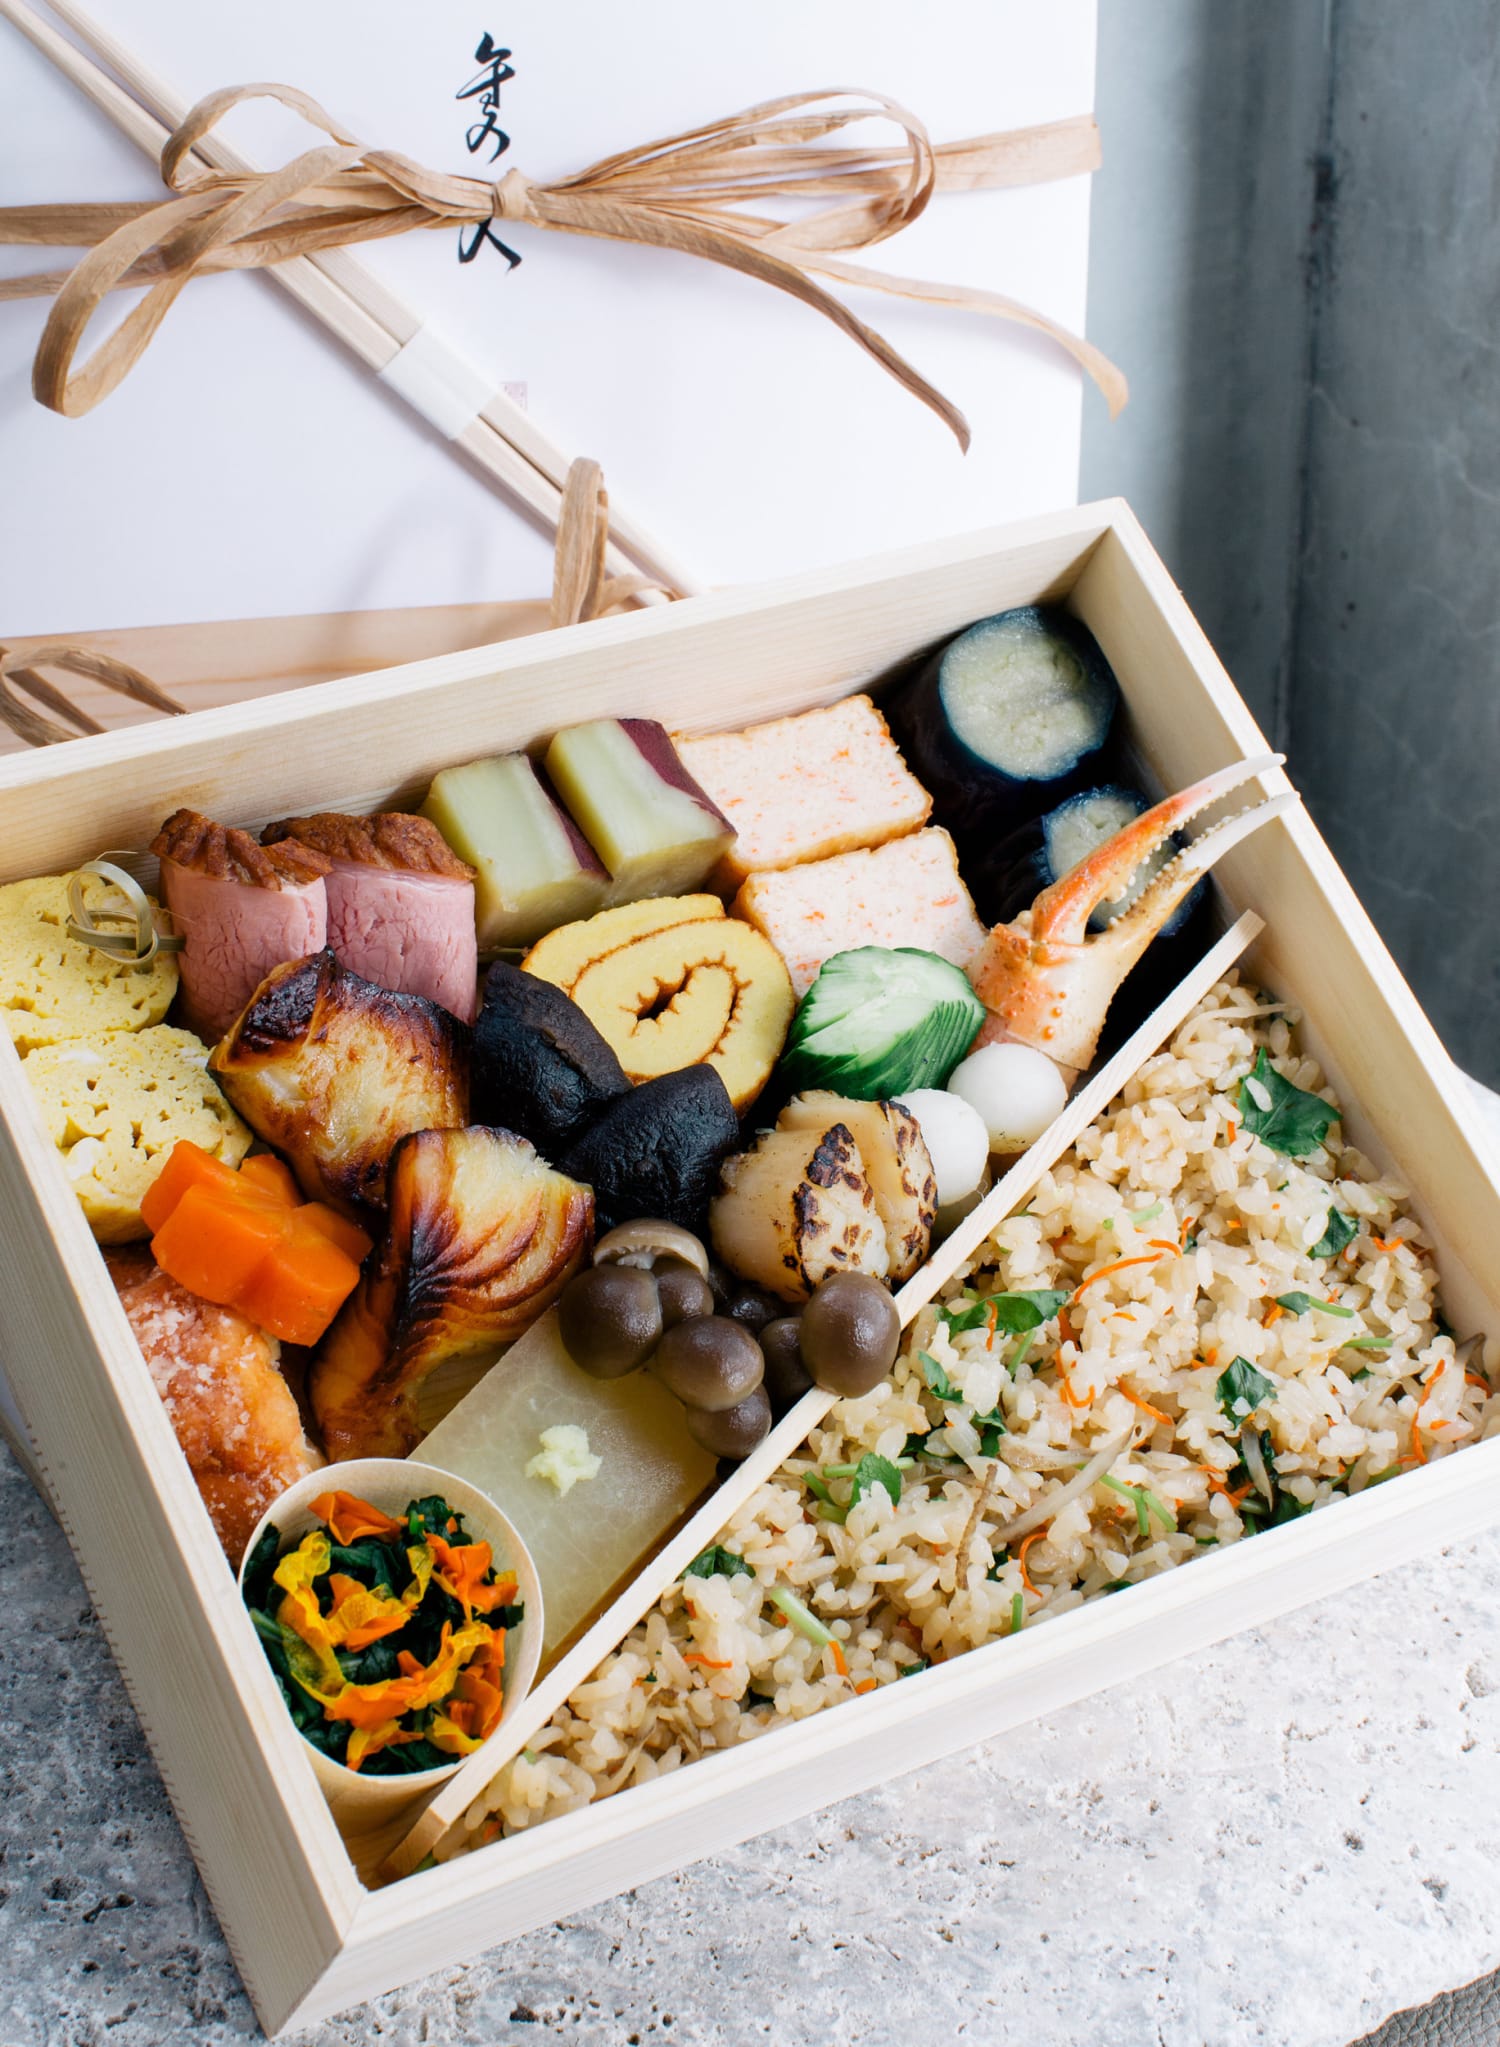 Bento boxes are trending in fast casual